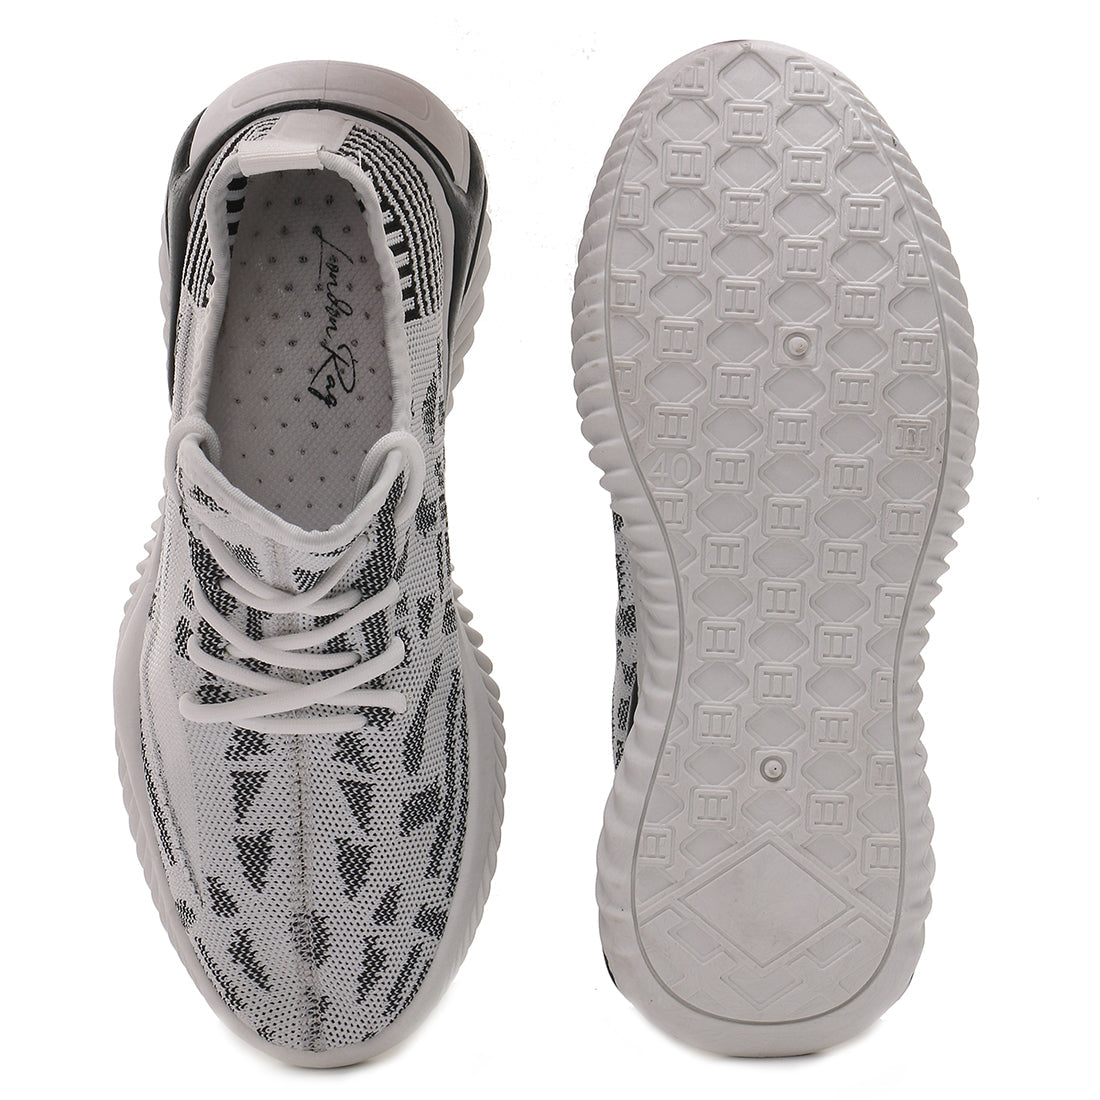 Men's Grey Knit Slip On Trainers